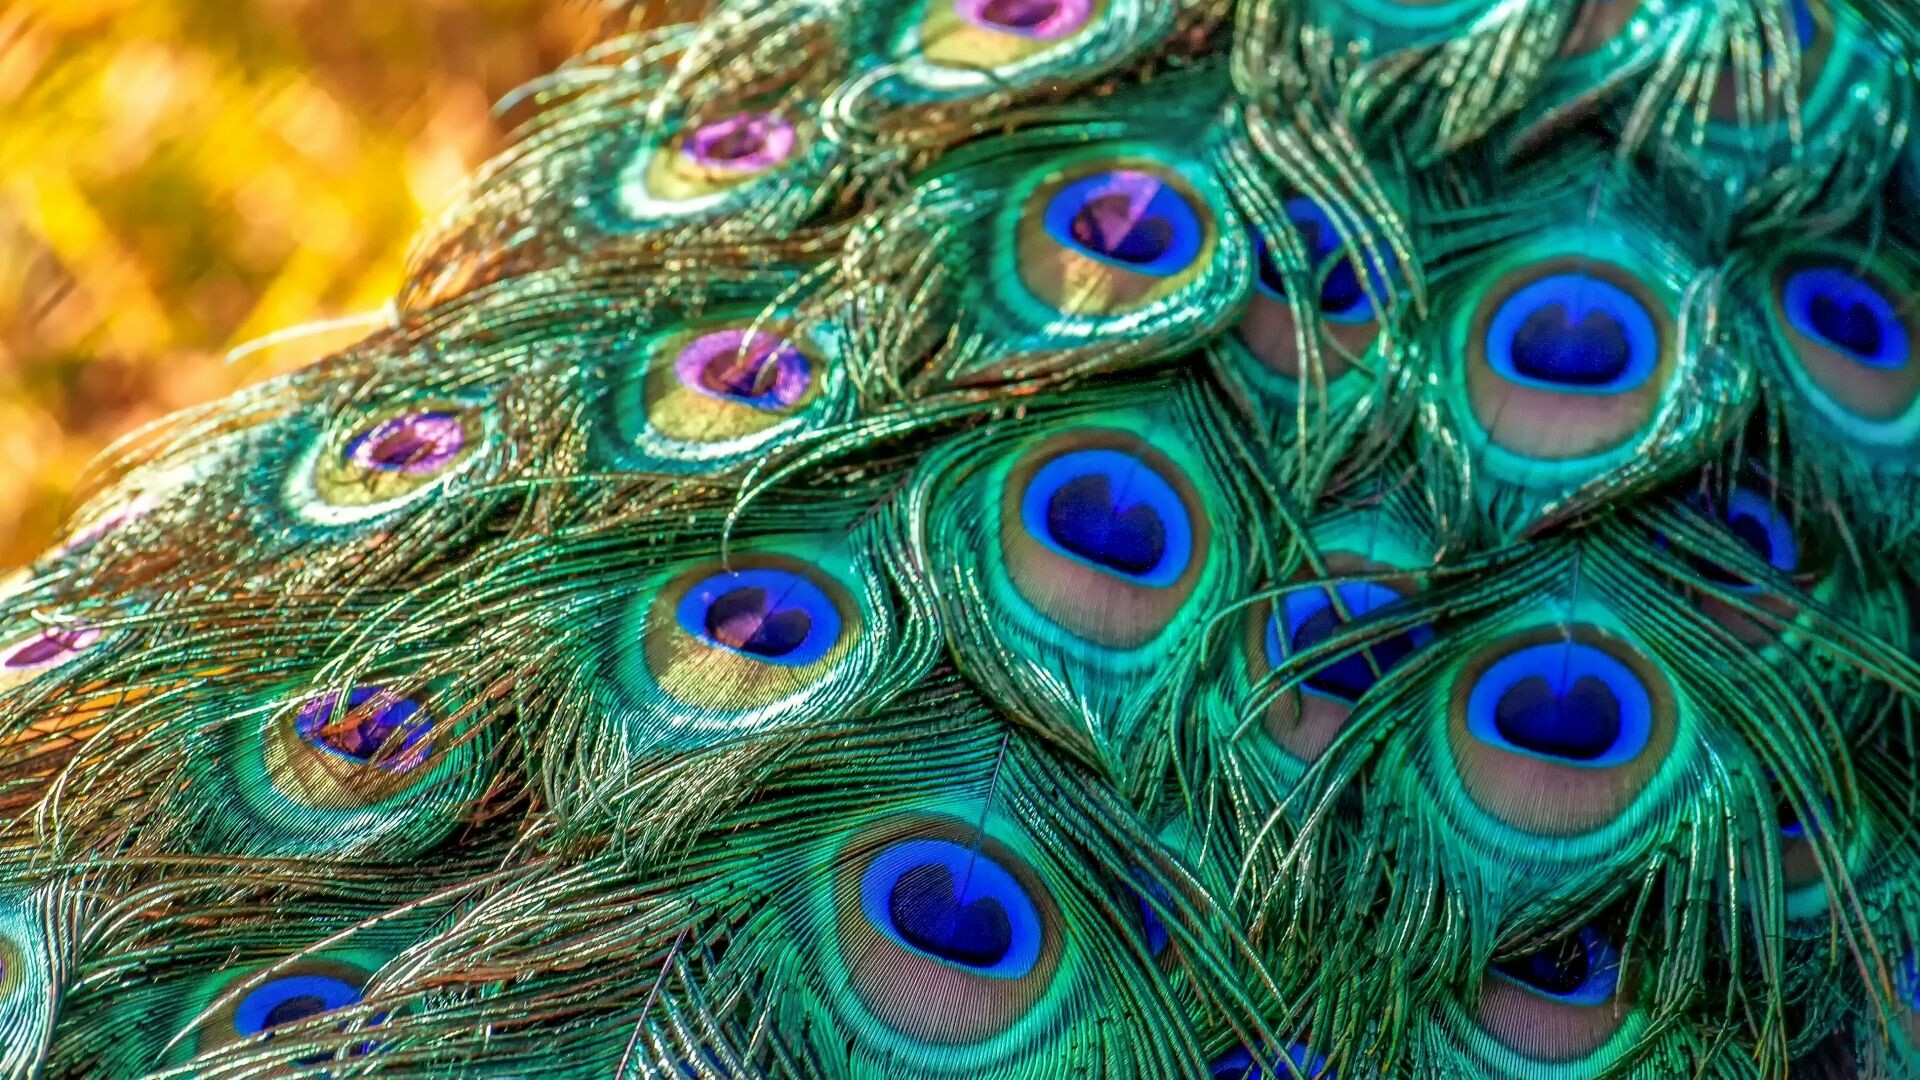 Peacock: Feathers, Bird, The "train" is made up of elongated upper tail coverts. 1920x1080 Full HD Wallpaper.